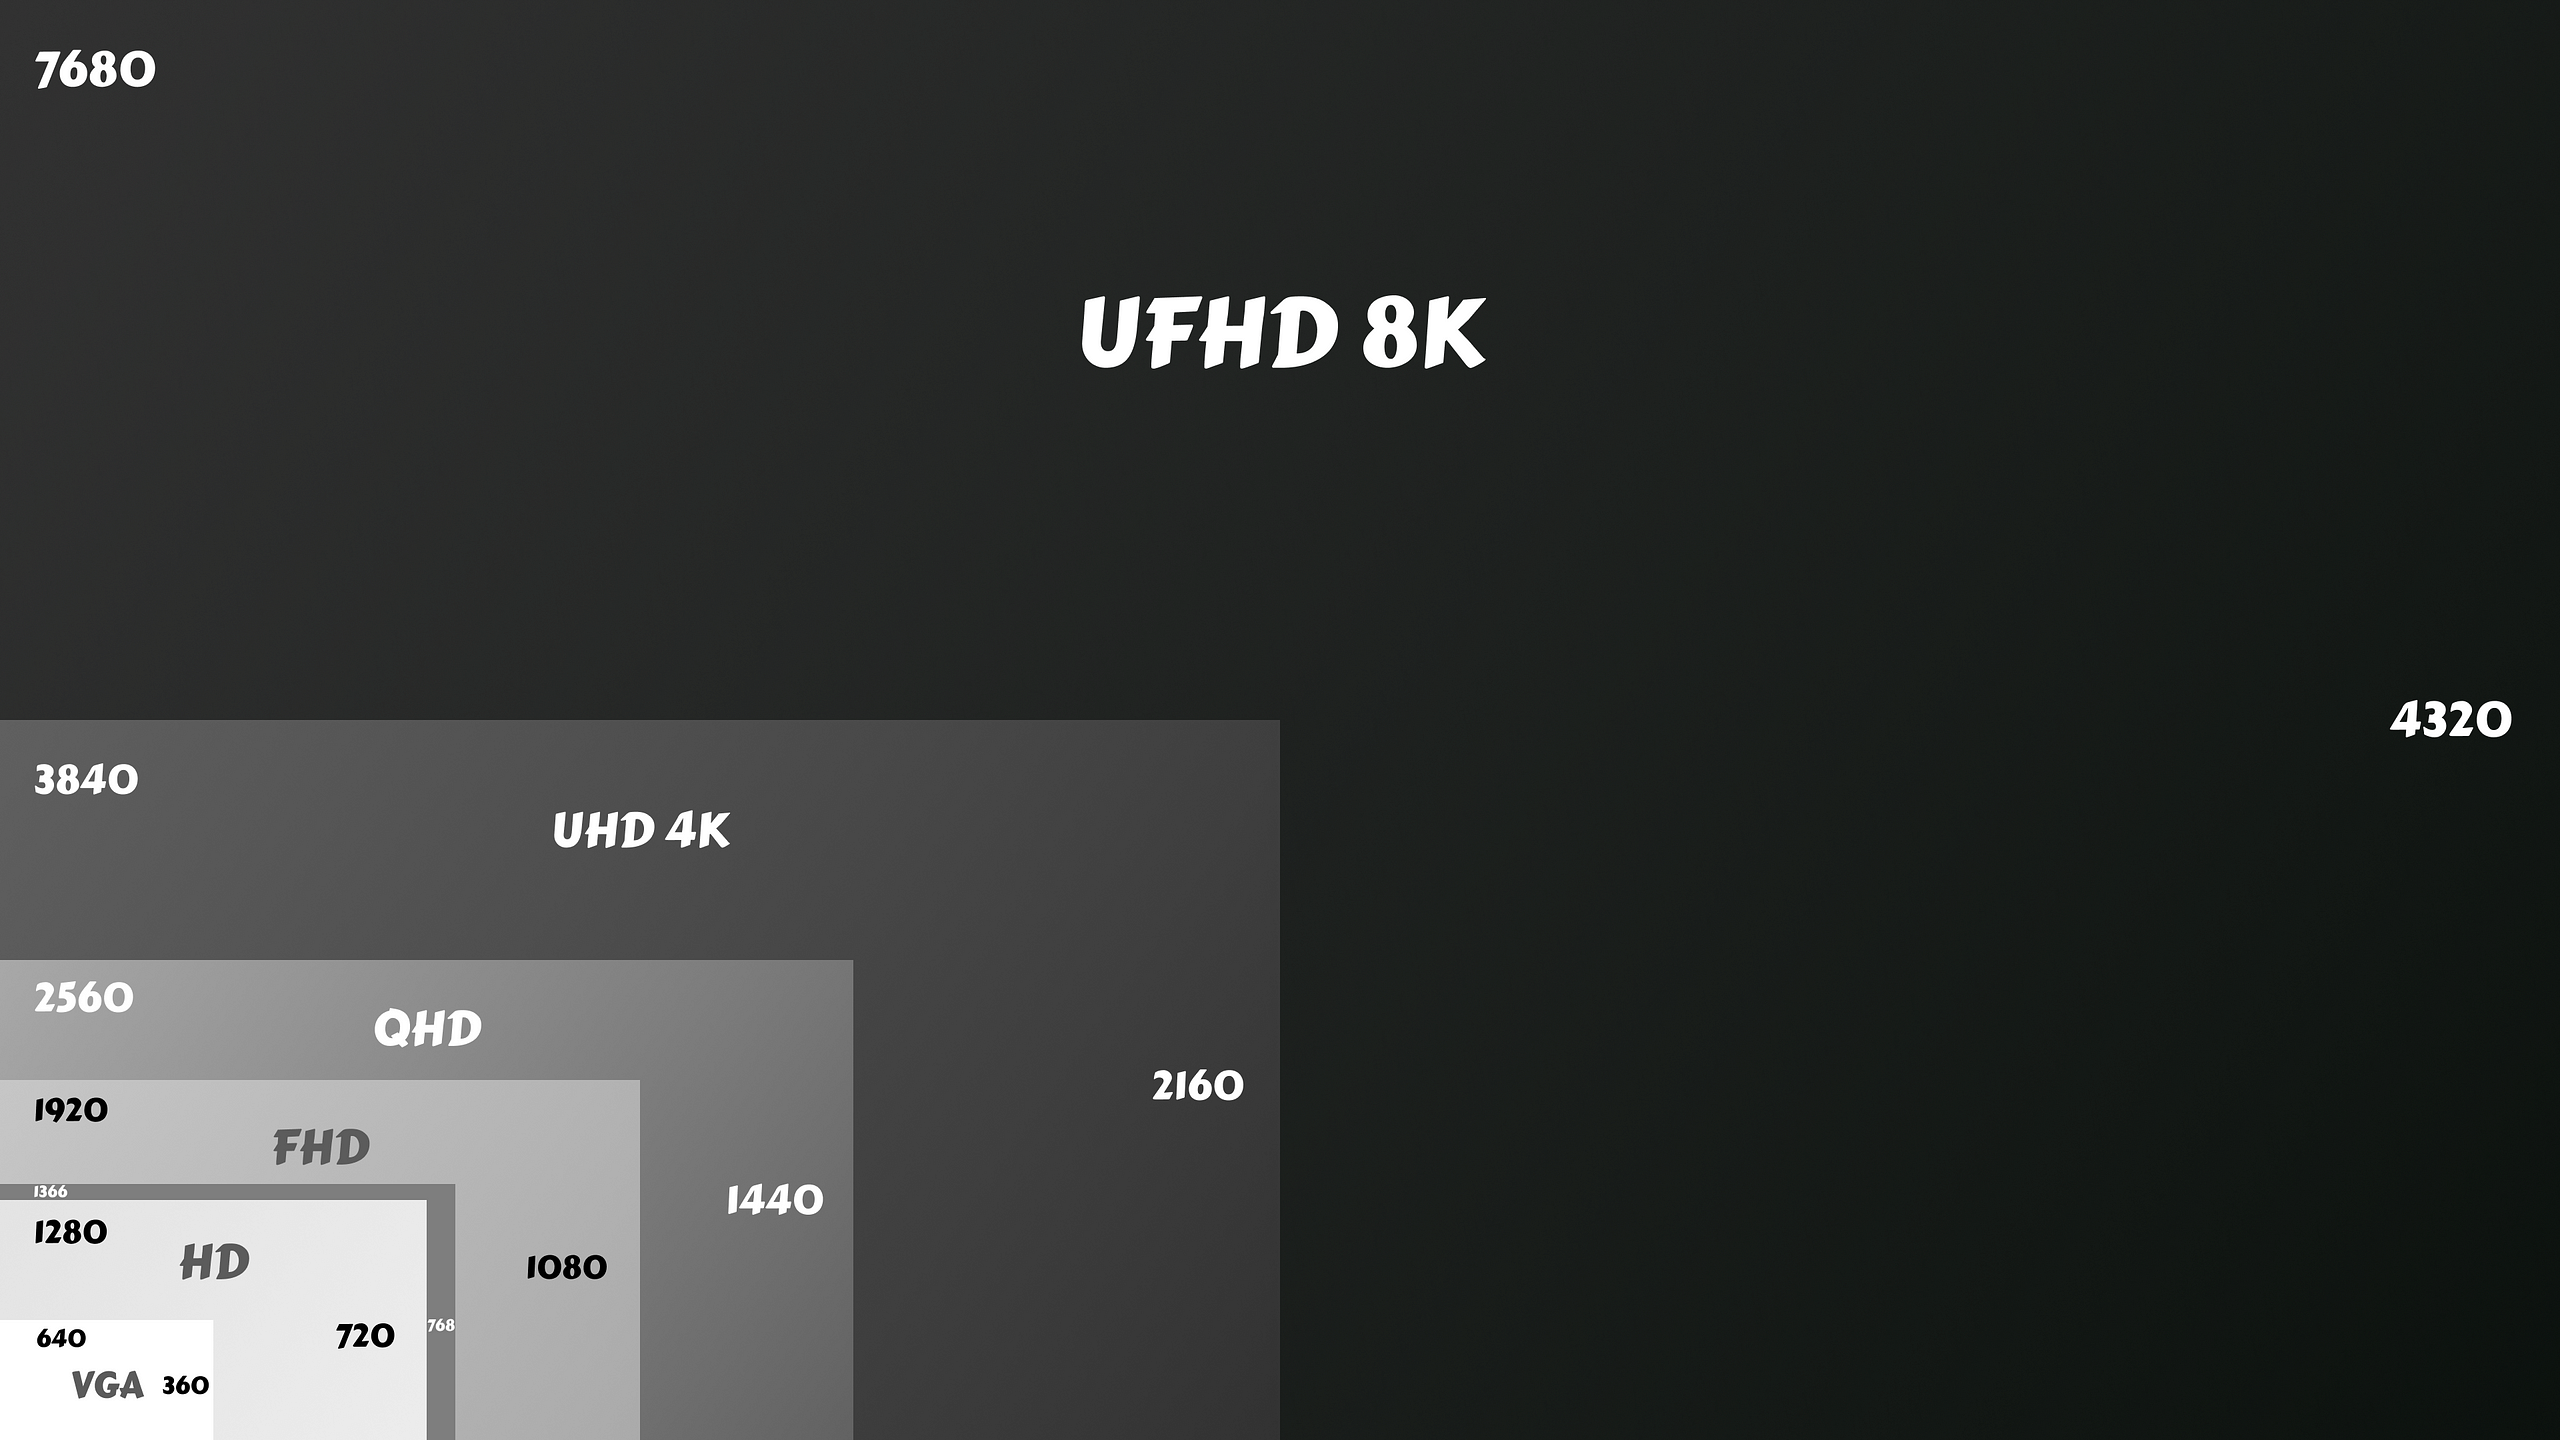 Screen Resolution chart for 16:9 Aspect Ratio, where 640 X 360 is named as Video Graphic Array or VGA.